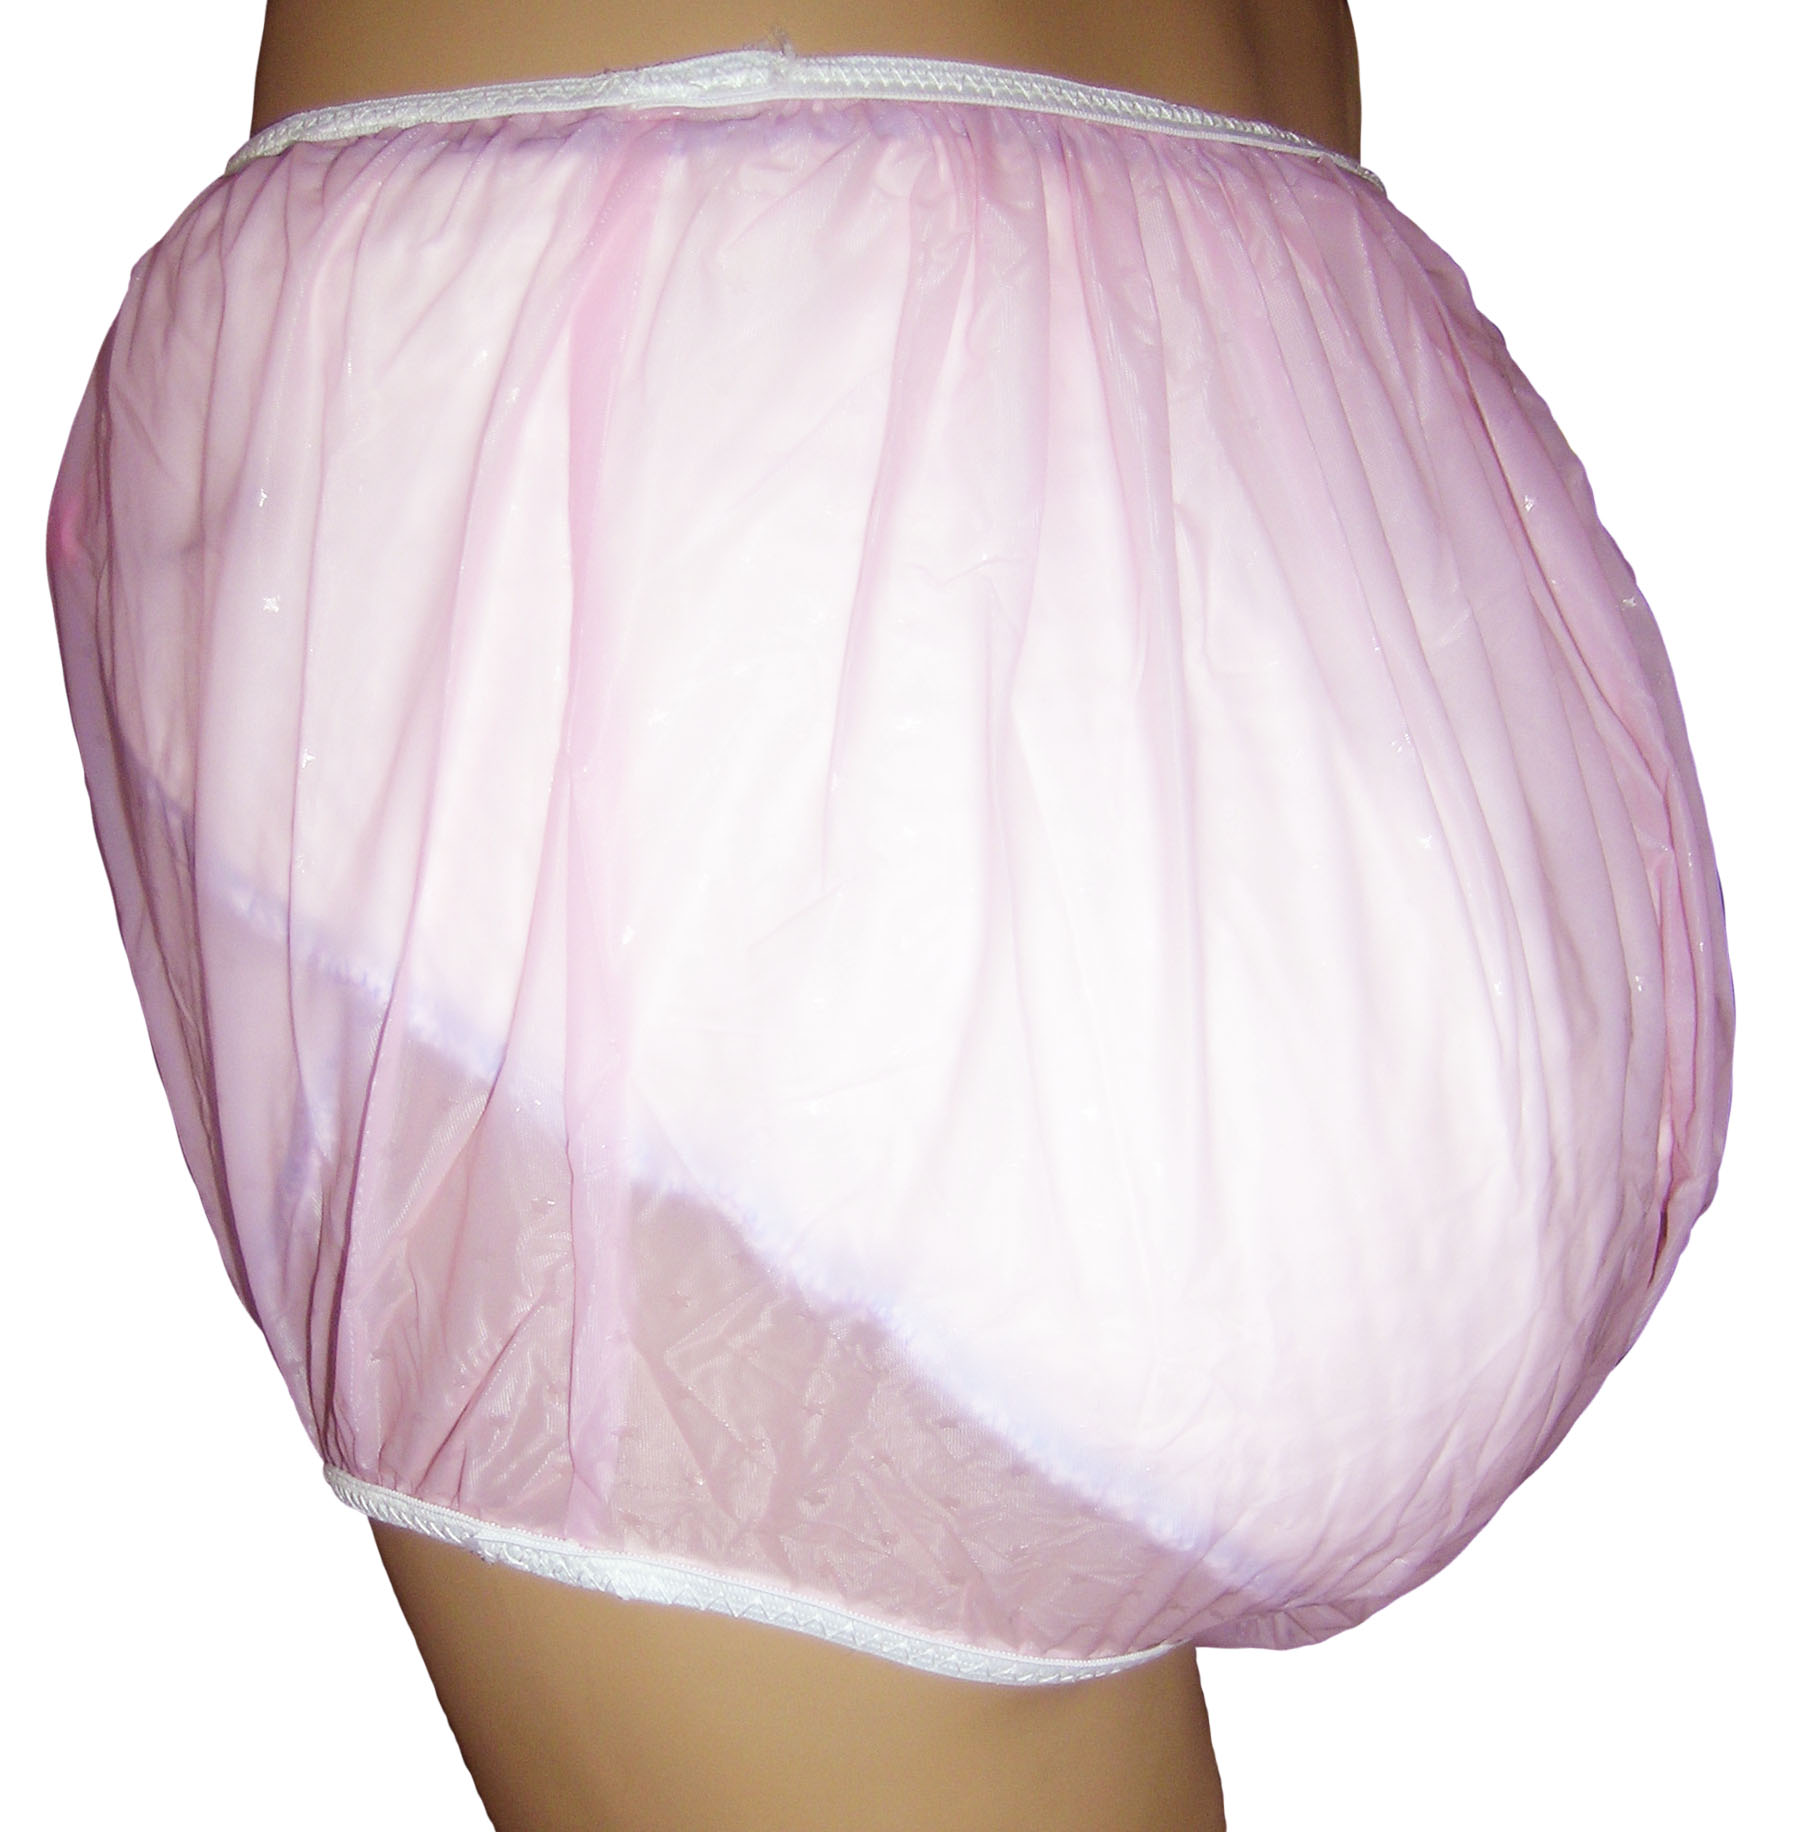 PVC Locking Diaper Rubber Trousers Adult Baby Size S-2XL Pink Transparent